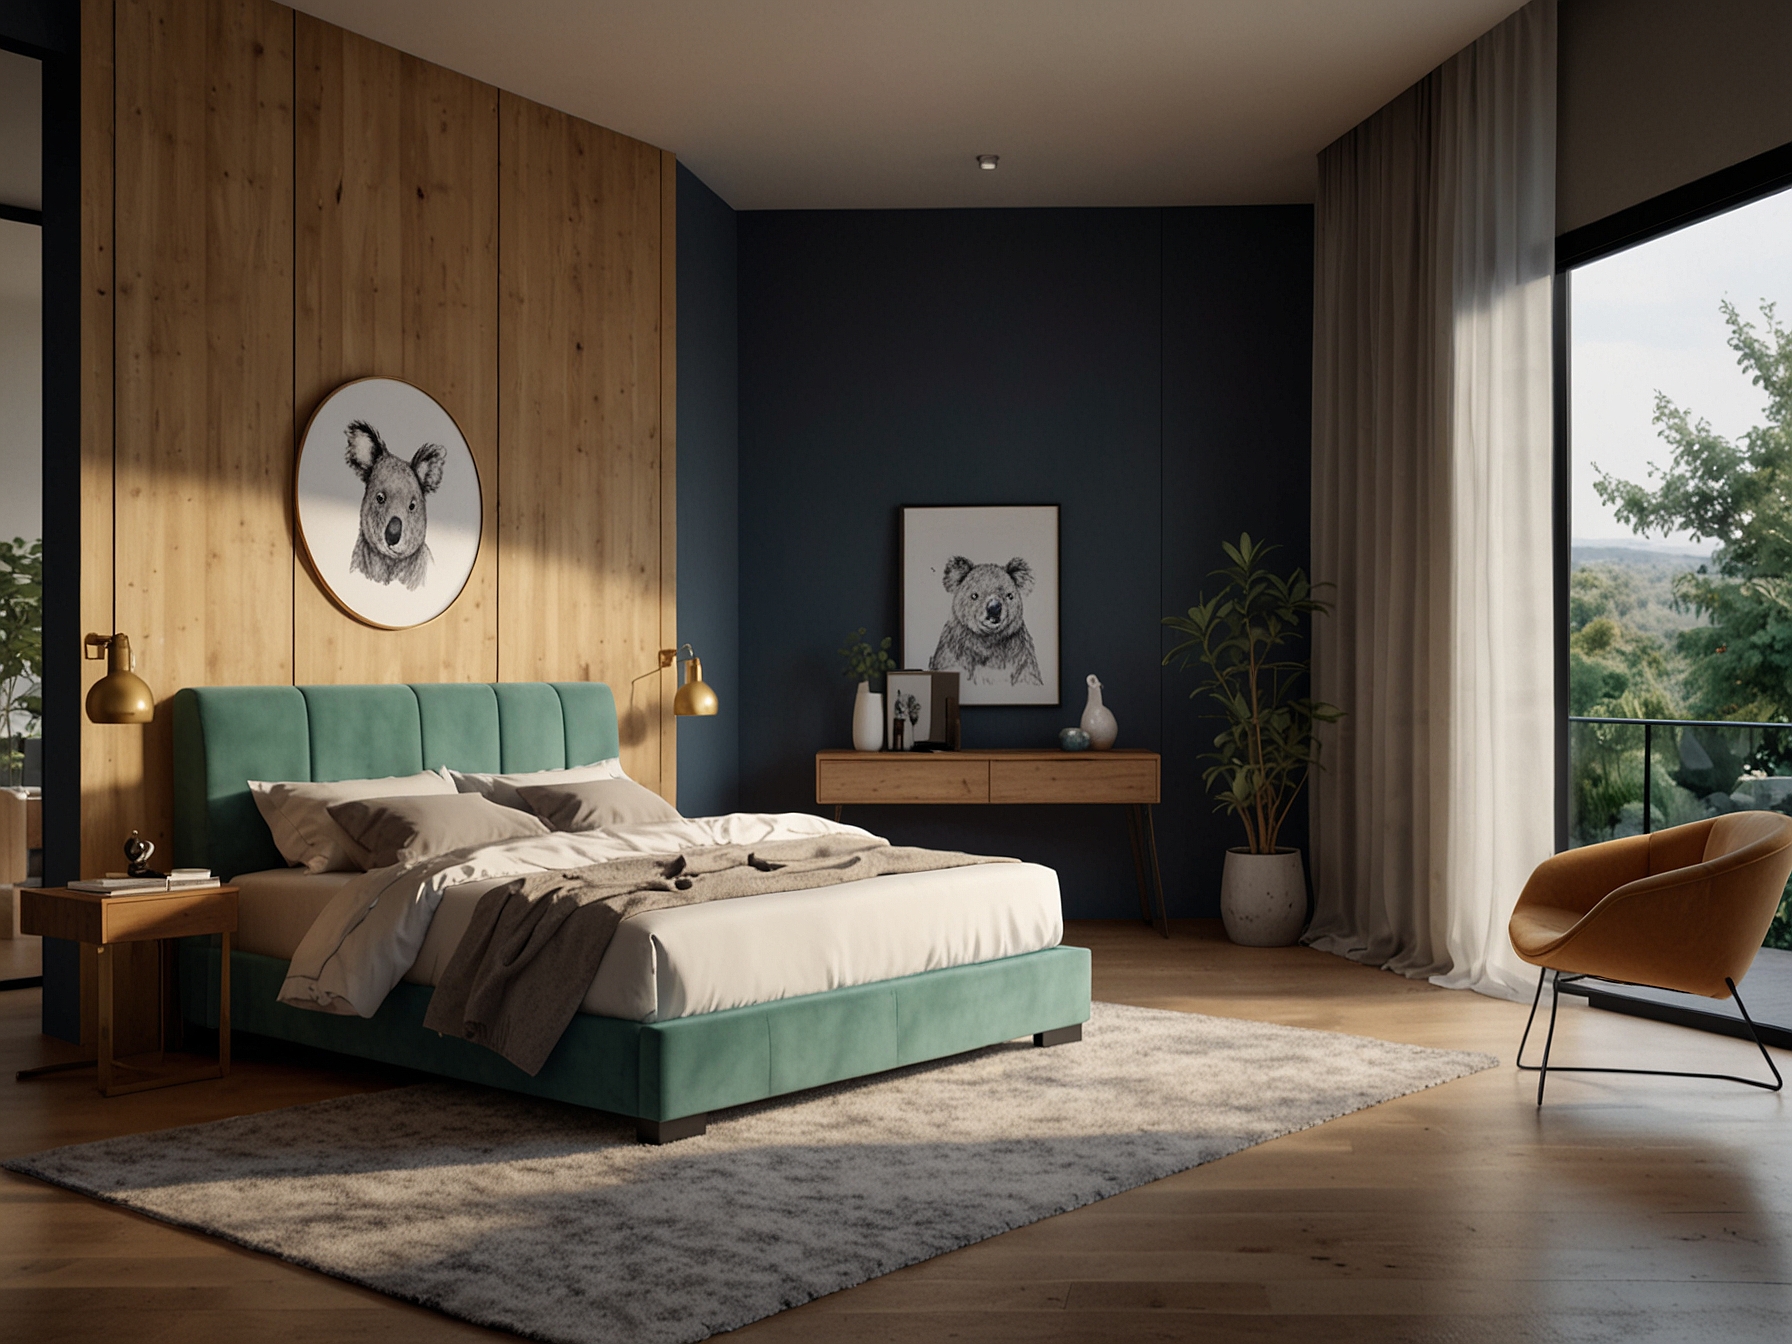 Illustration of a modern bedroom featuring a discounted Koala mattress, highlighting the 30% off EOFY deal with promotional banners.